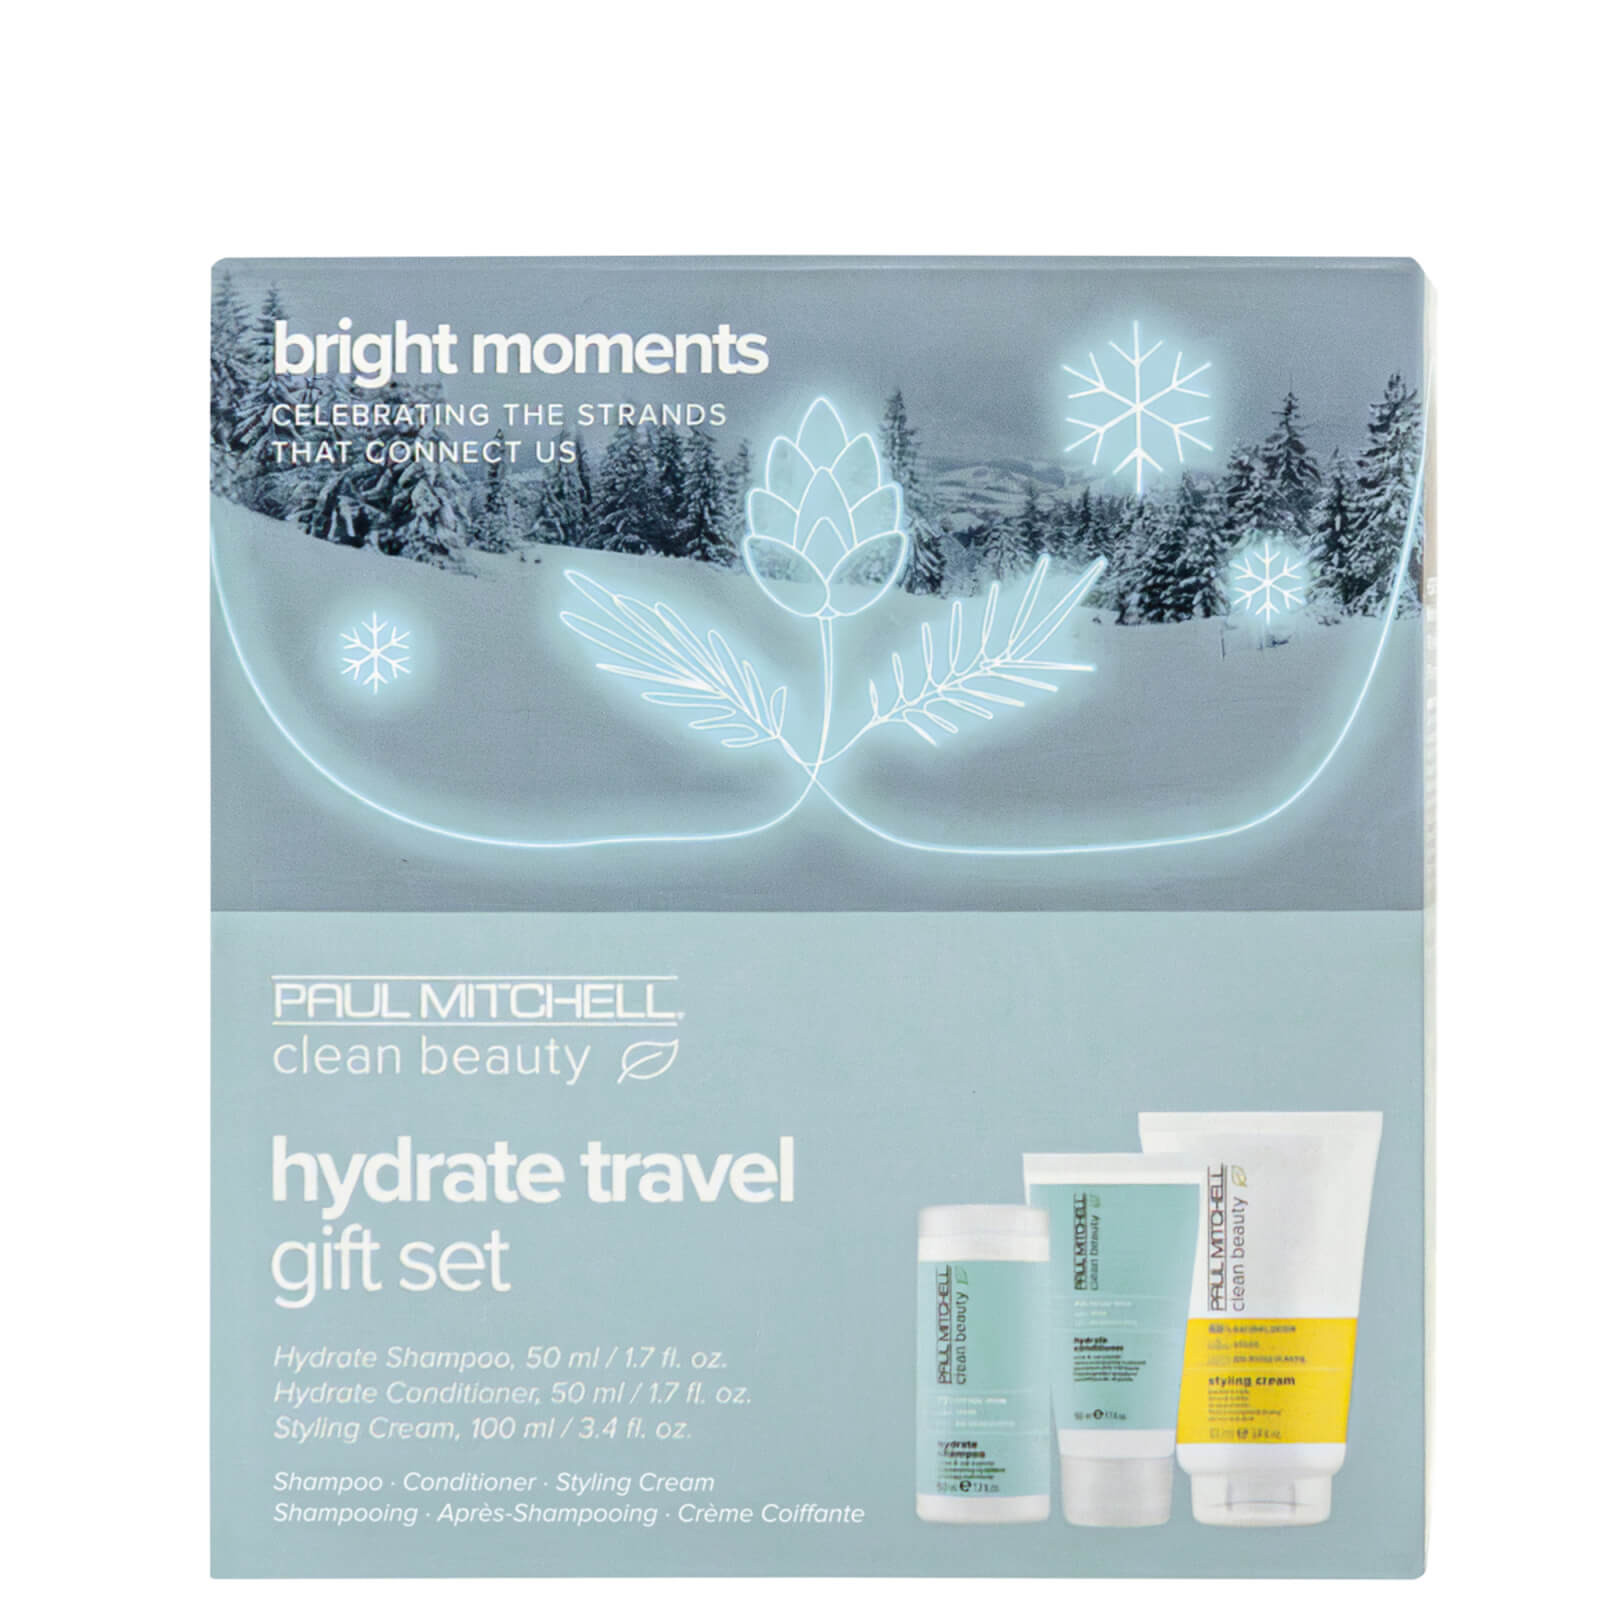 paul mitchell clean beauty hydrate travel gift set trio (worth £44.50)